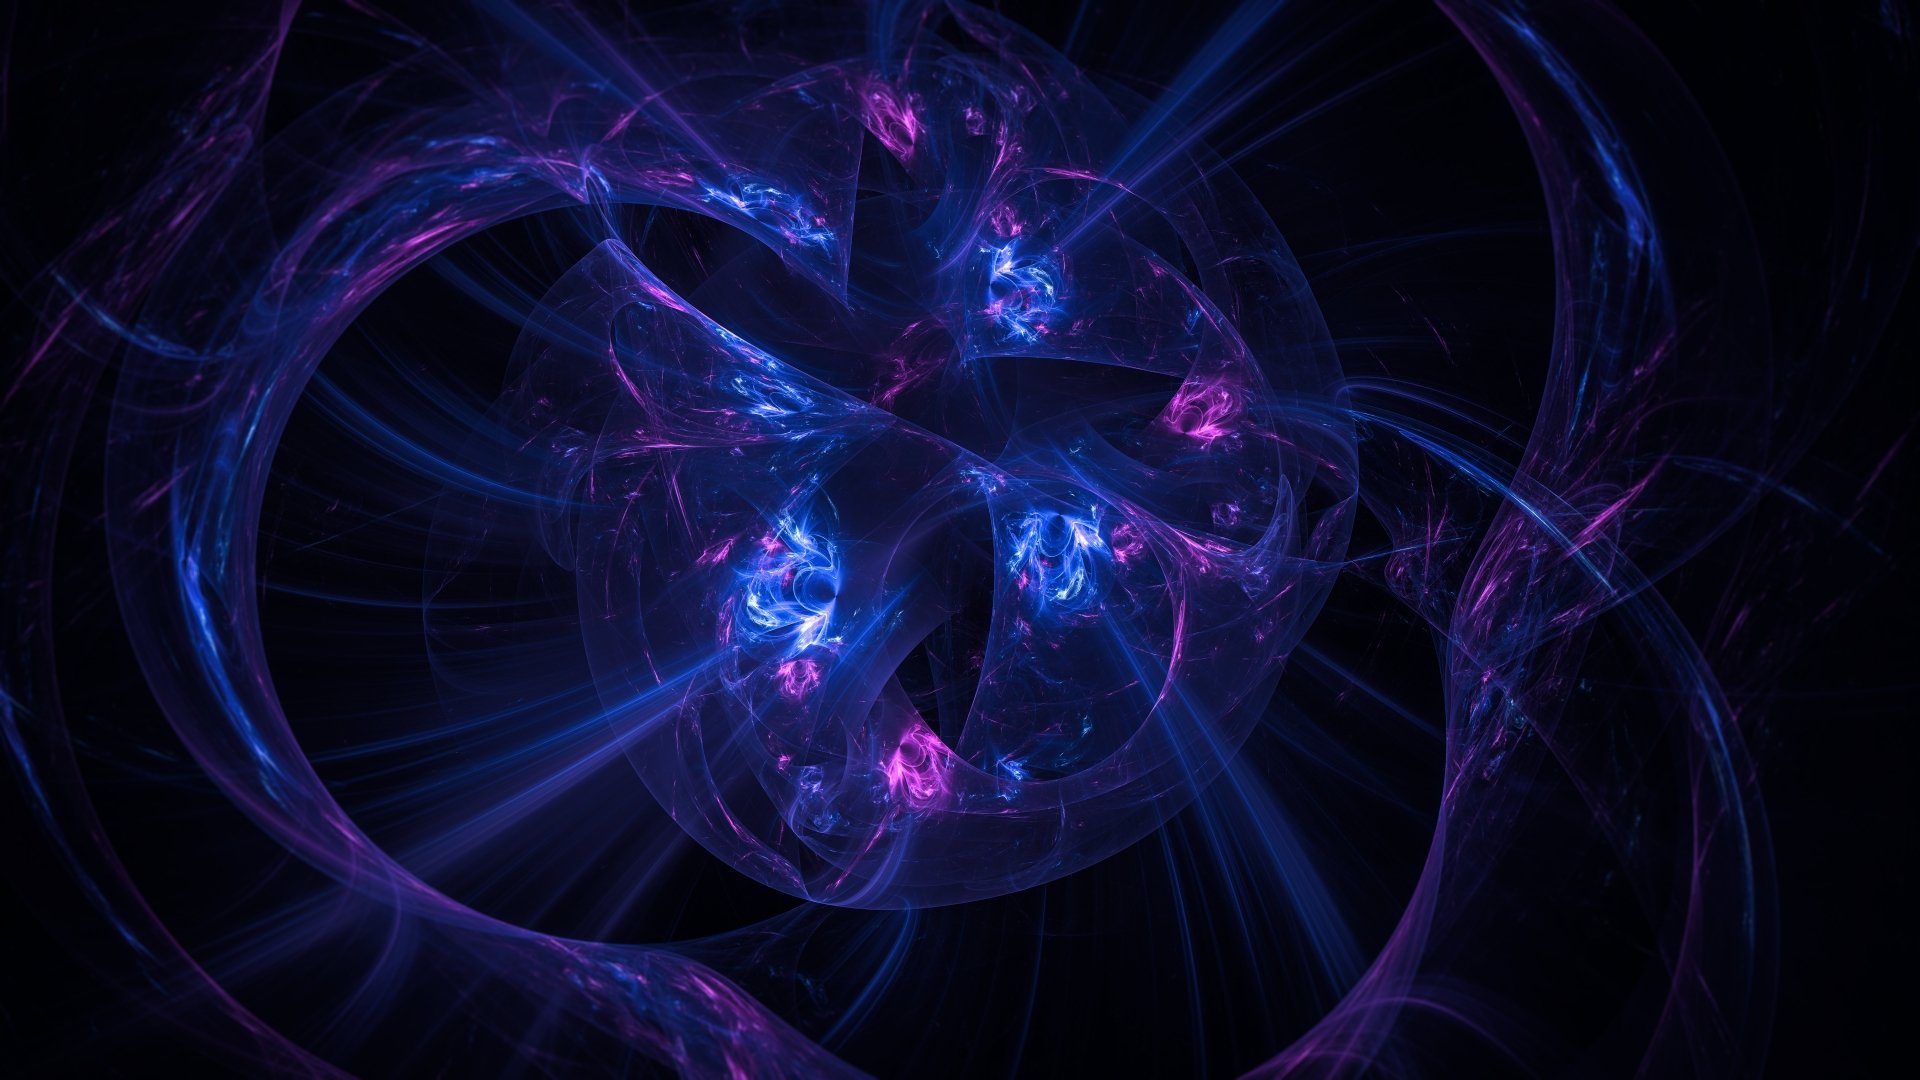 Abstract Fractal 8k Ultra Hd Wallpaper Background Image 7680x4320